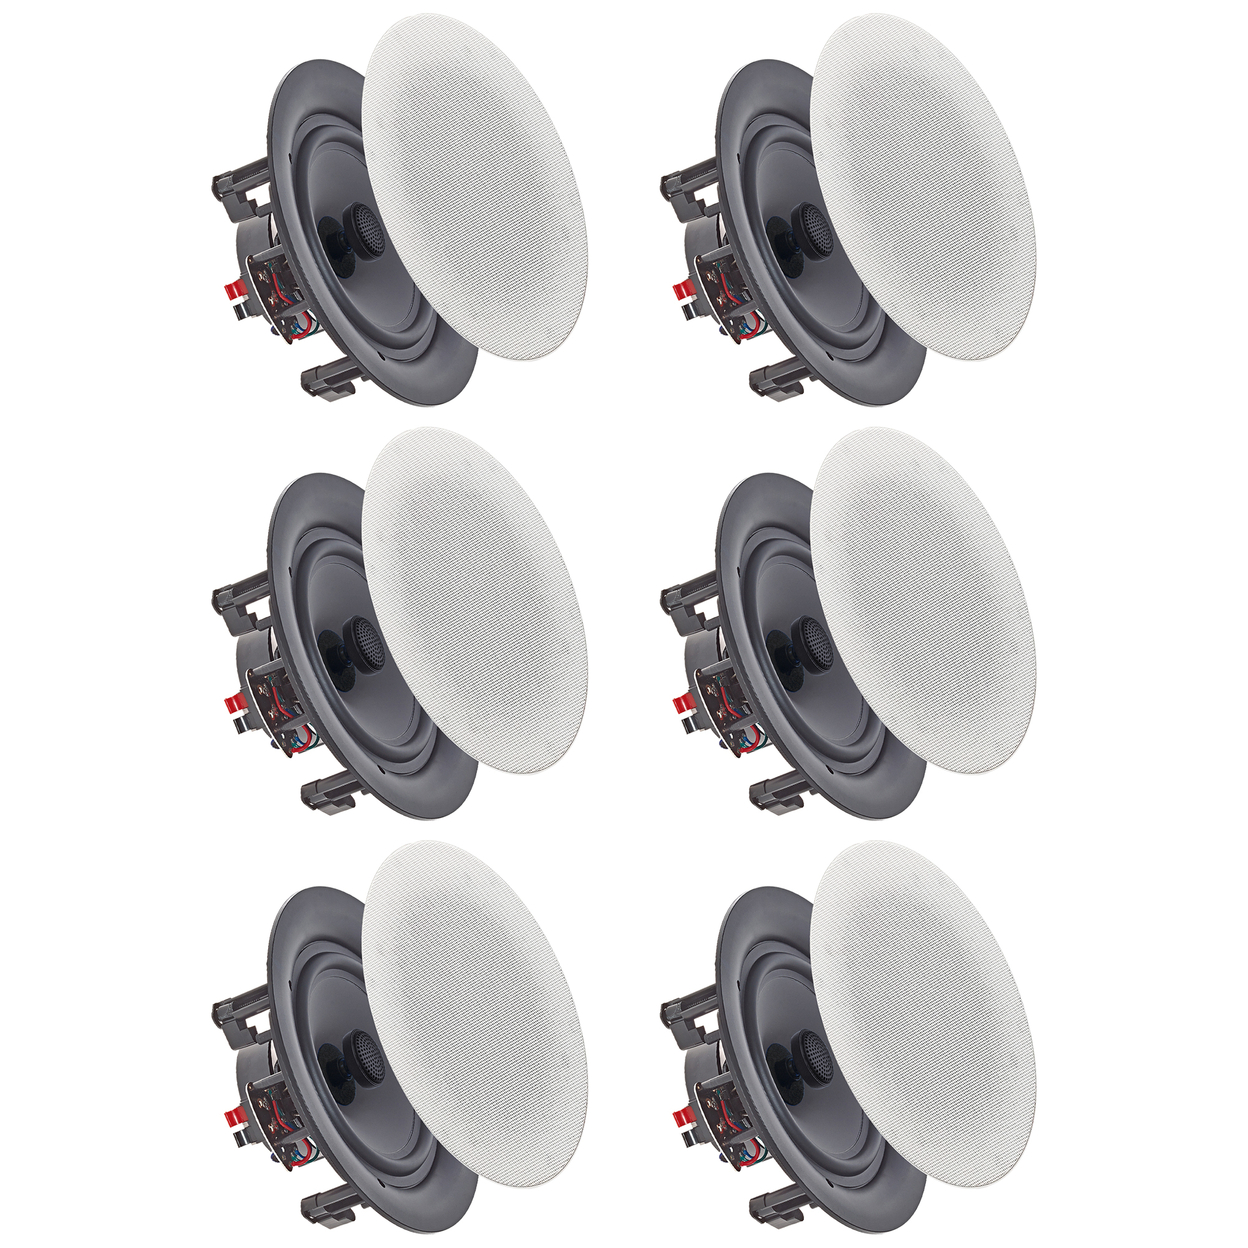 Set Of (6) Vaiyer 6.5 Inch 8 Ohm 200 Watts Frameless Speakers, Flush Mount In-Wall In-Ceiling 2-Way Mid Bass Woofer Speakers